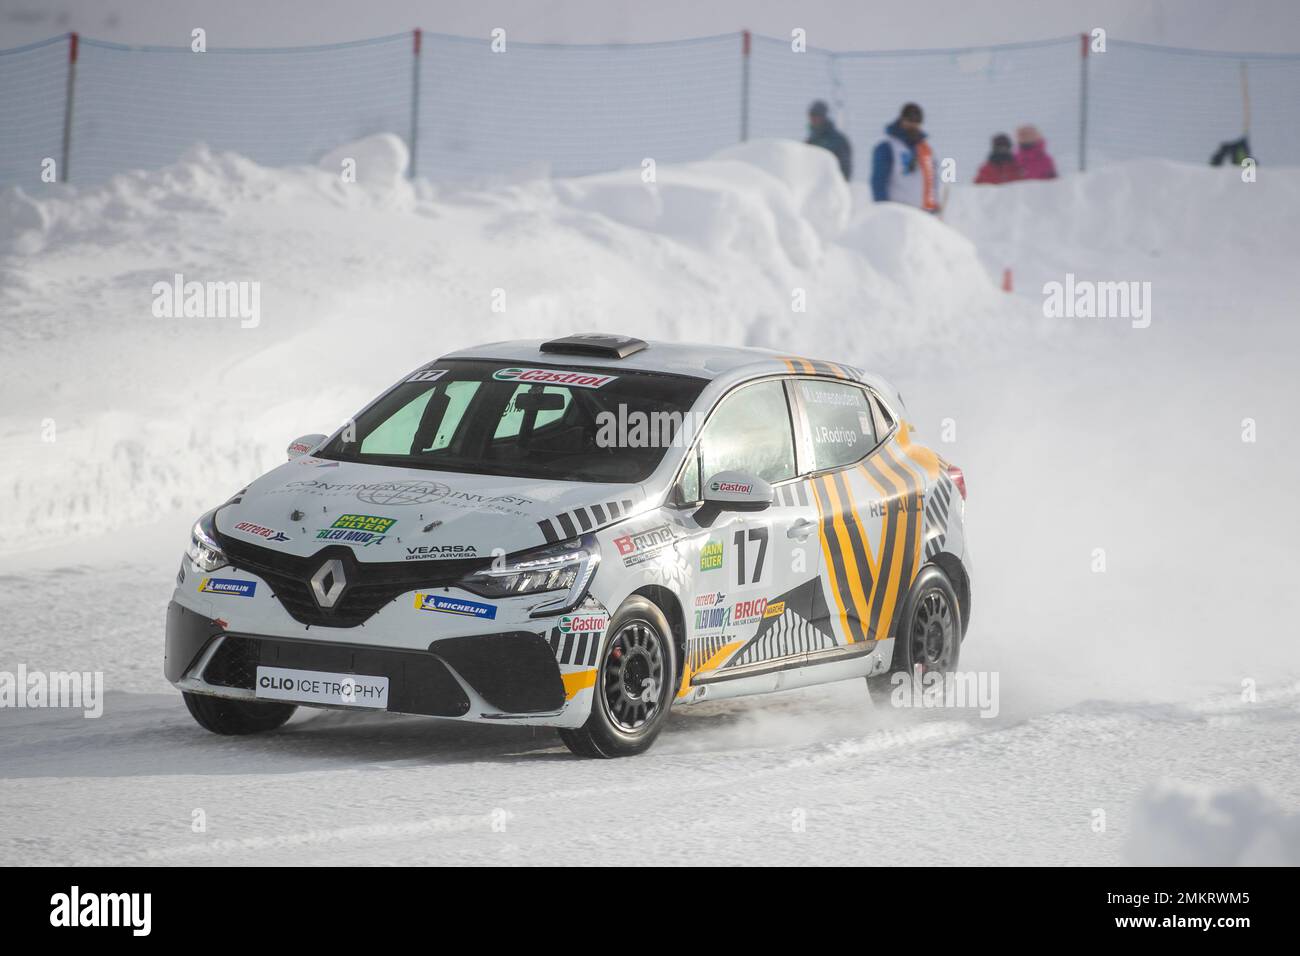 17A Mathieu LANNEPOUDENX (FR), BRUNET COMPETITION, action 17B Joaquin RODRIGO (ES), BRUNET COMPETITION, action during the 2023 Clio Ice Trophy 2023 - GSeries G2 on the Circuit Andorra - Pas de la Casa, on January 28, 2023 in Encamp, Andorra - Picture Damien Doumergue / DPPI Stock Photo